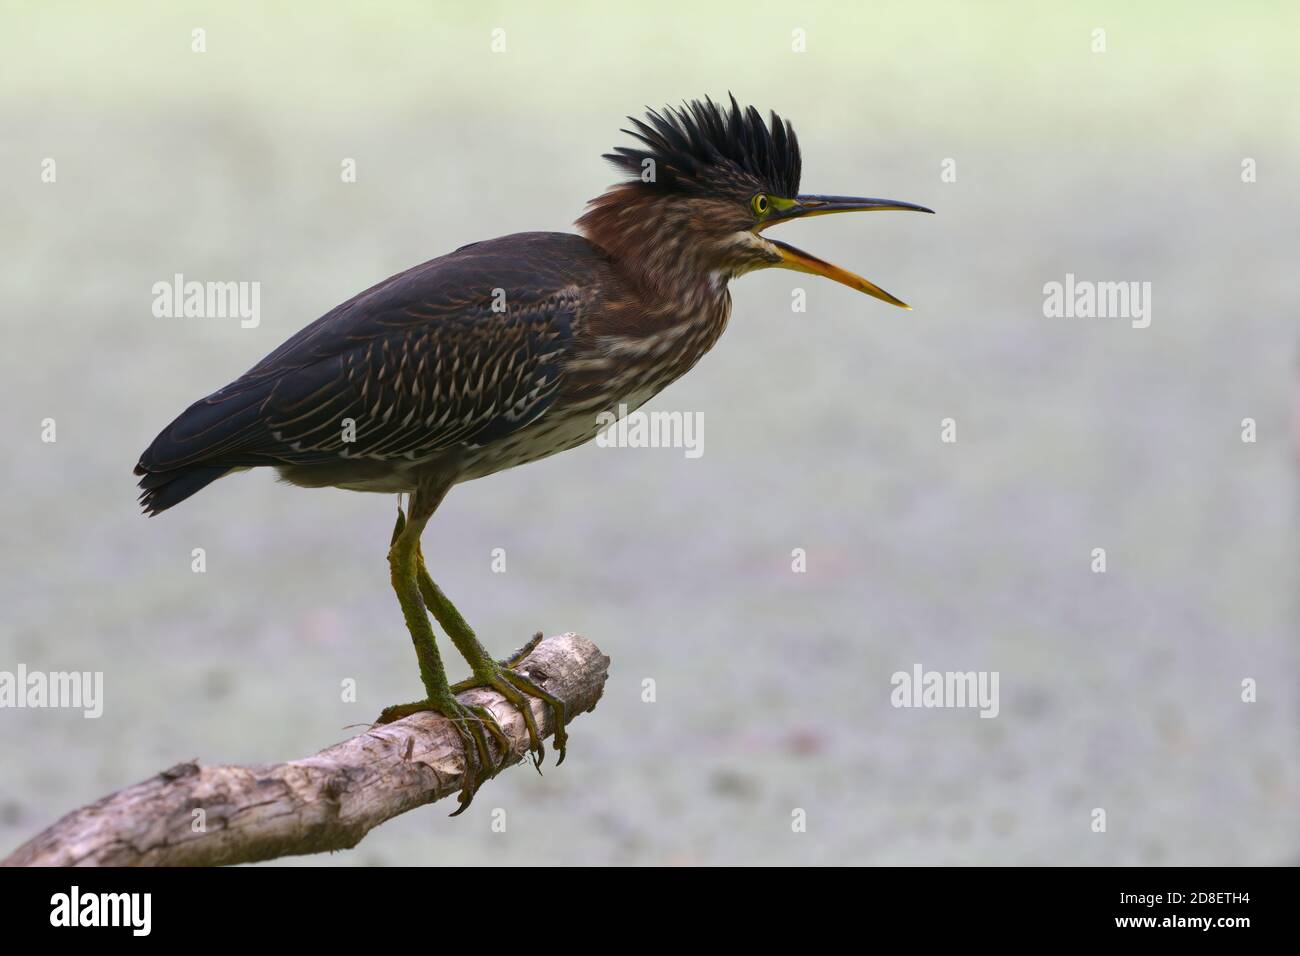 Green Heron Croaking Perched On Branch With Crest Up Over Duckweed Pond In Pottersville, NJ, USA Stock Photo